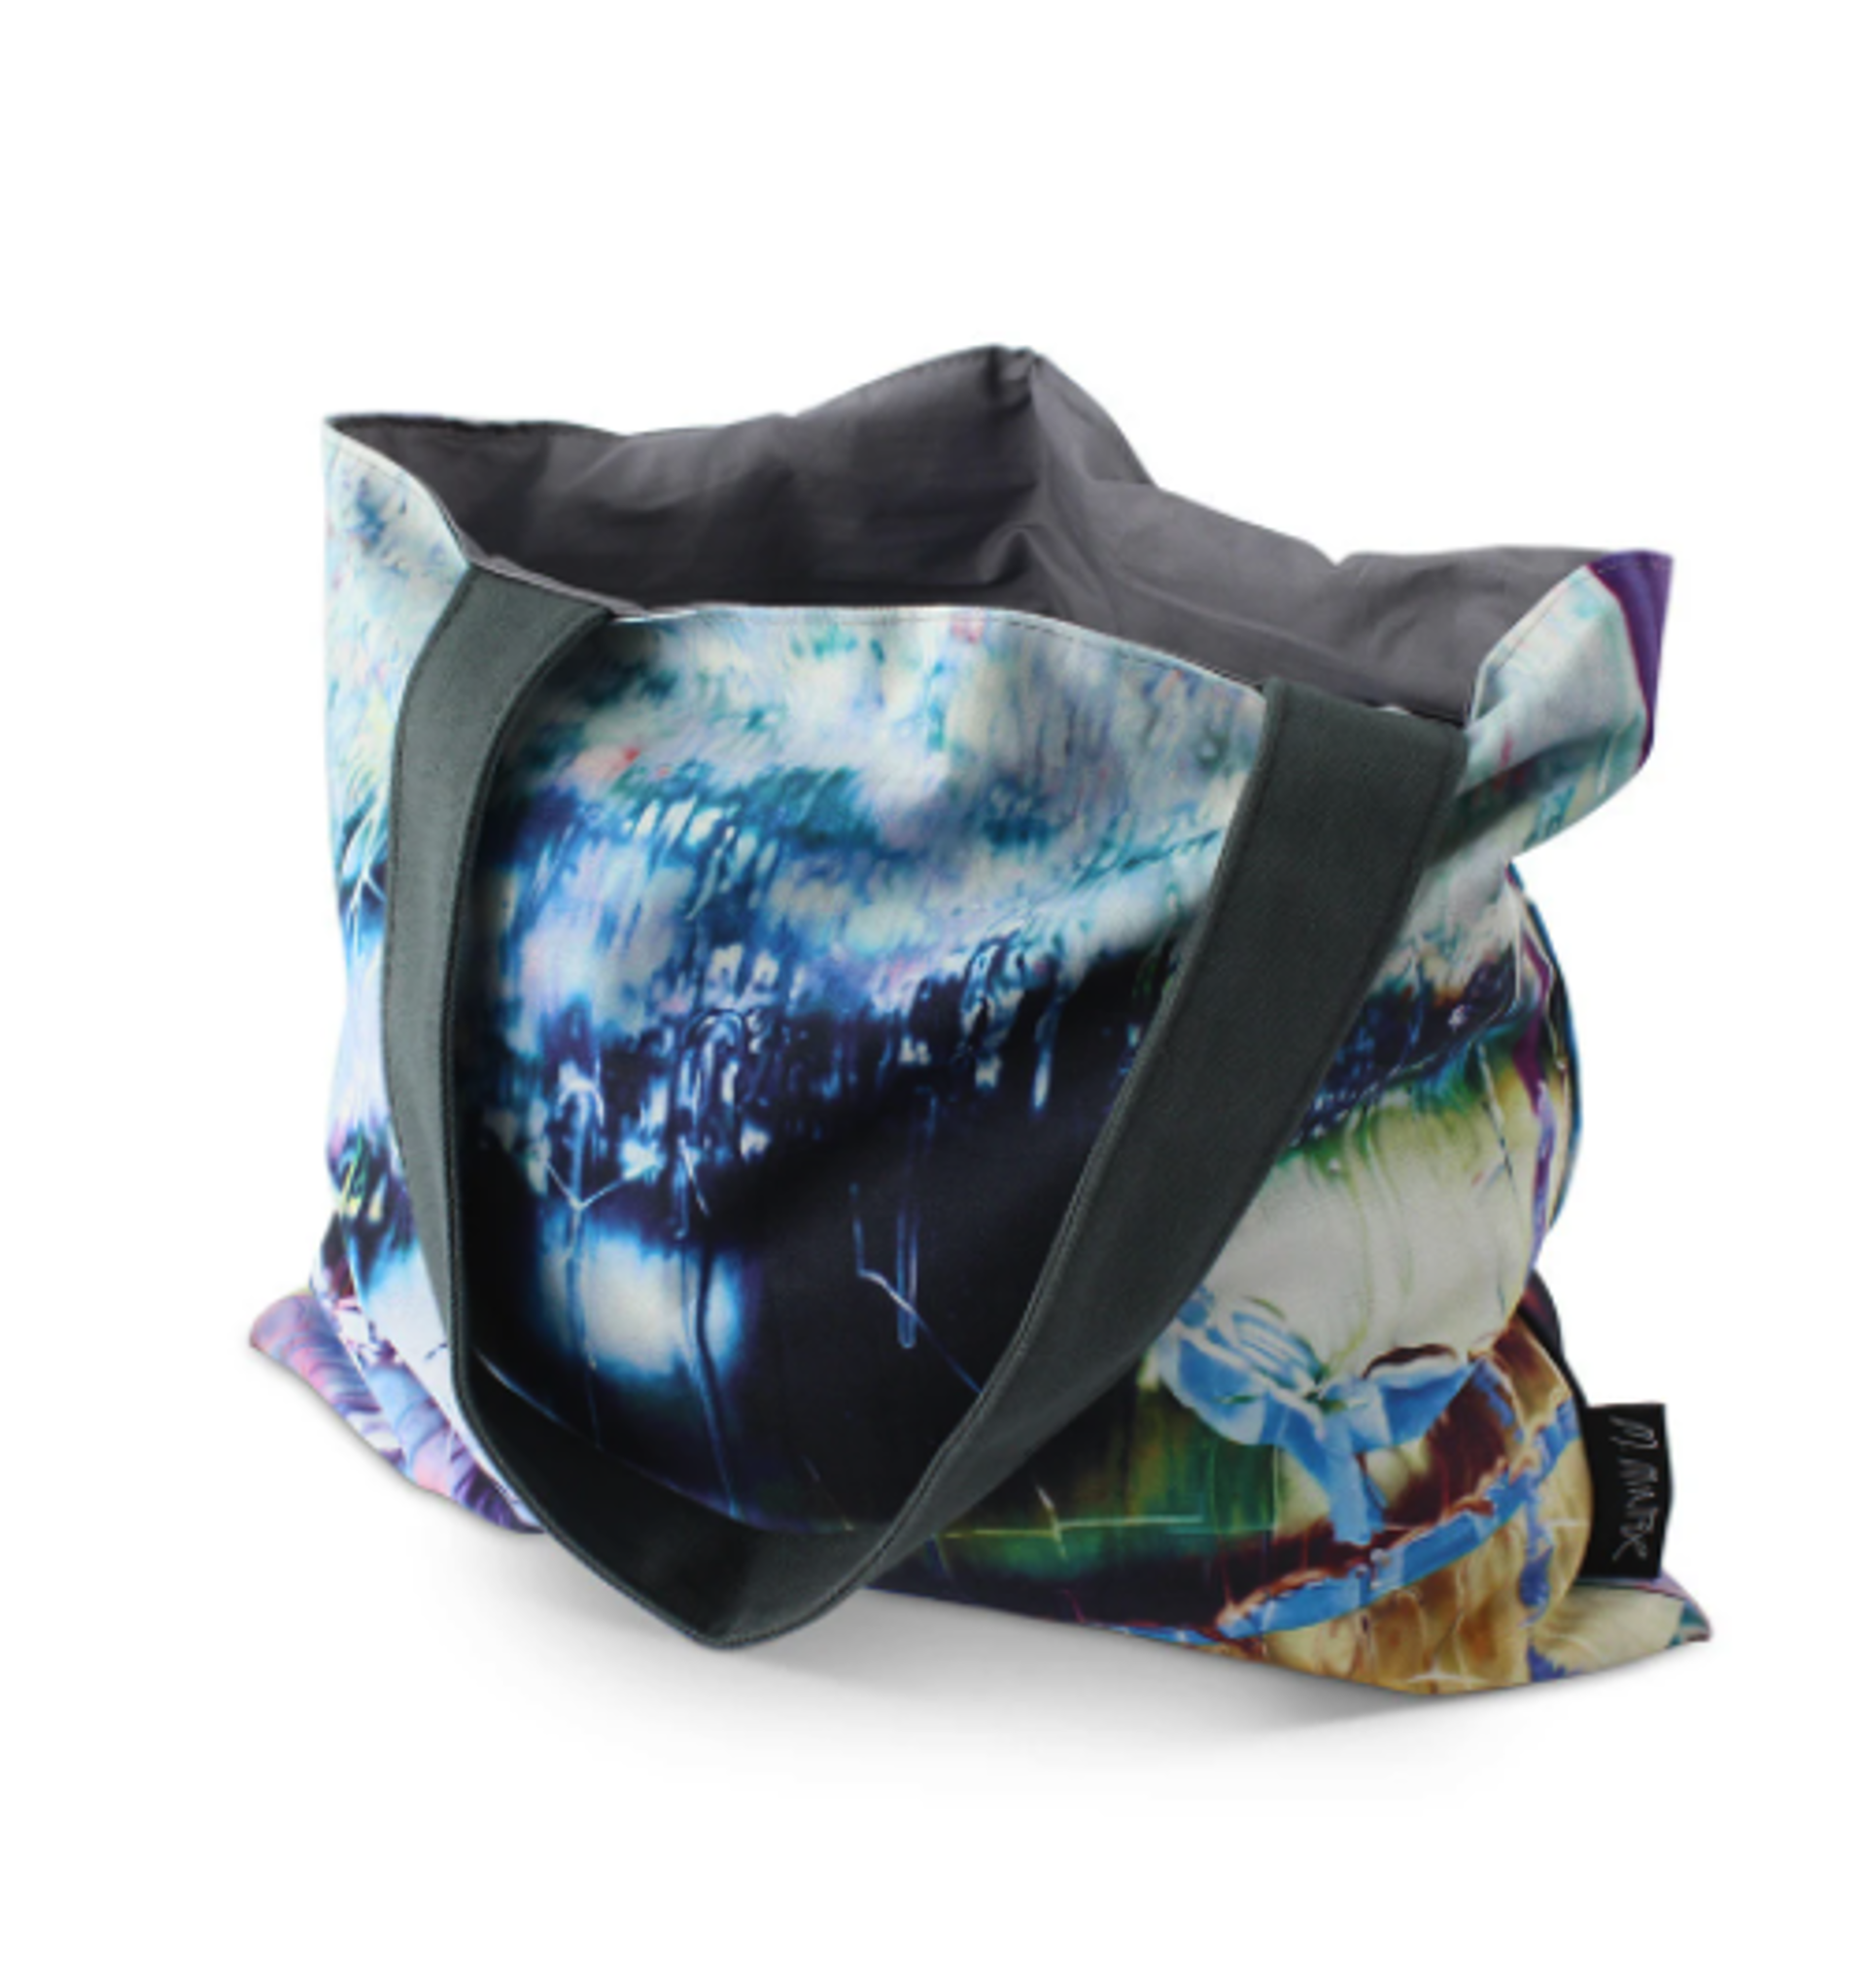 Private Eye Tote by Marilyn Minter